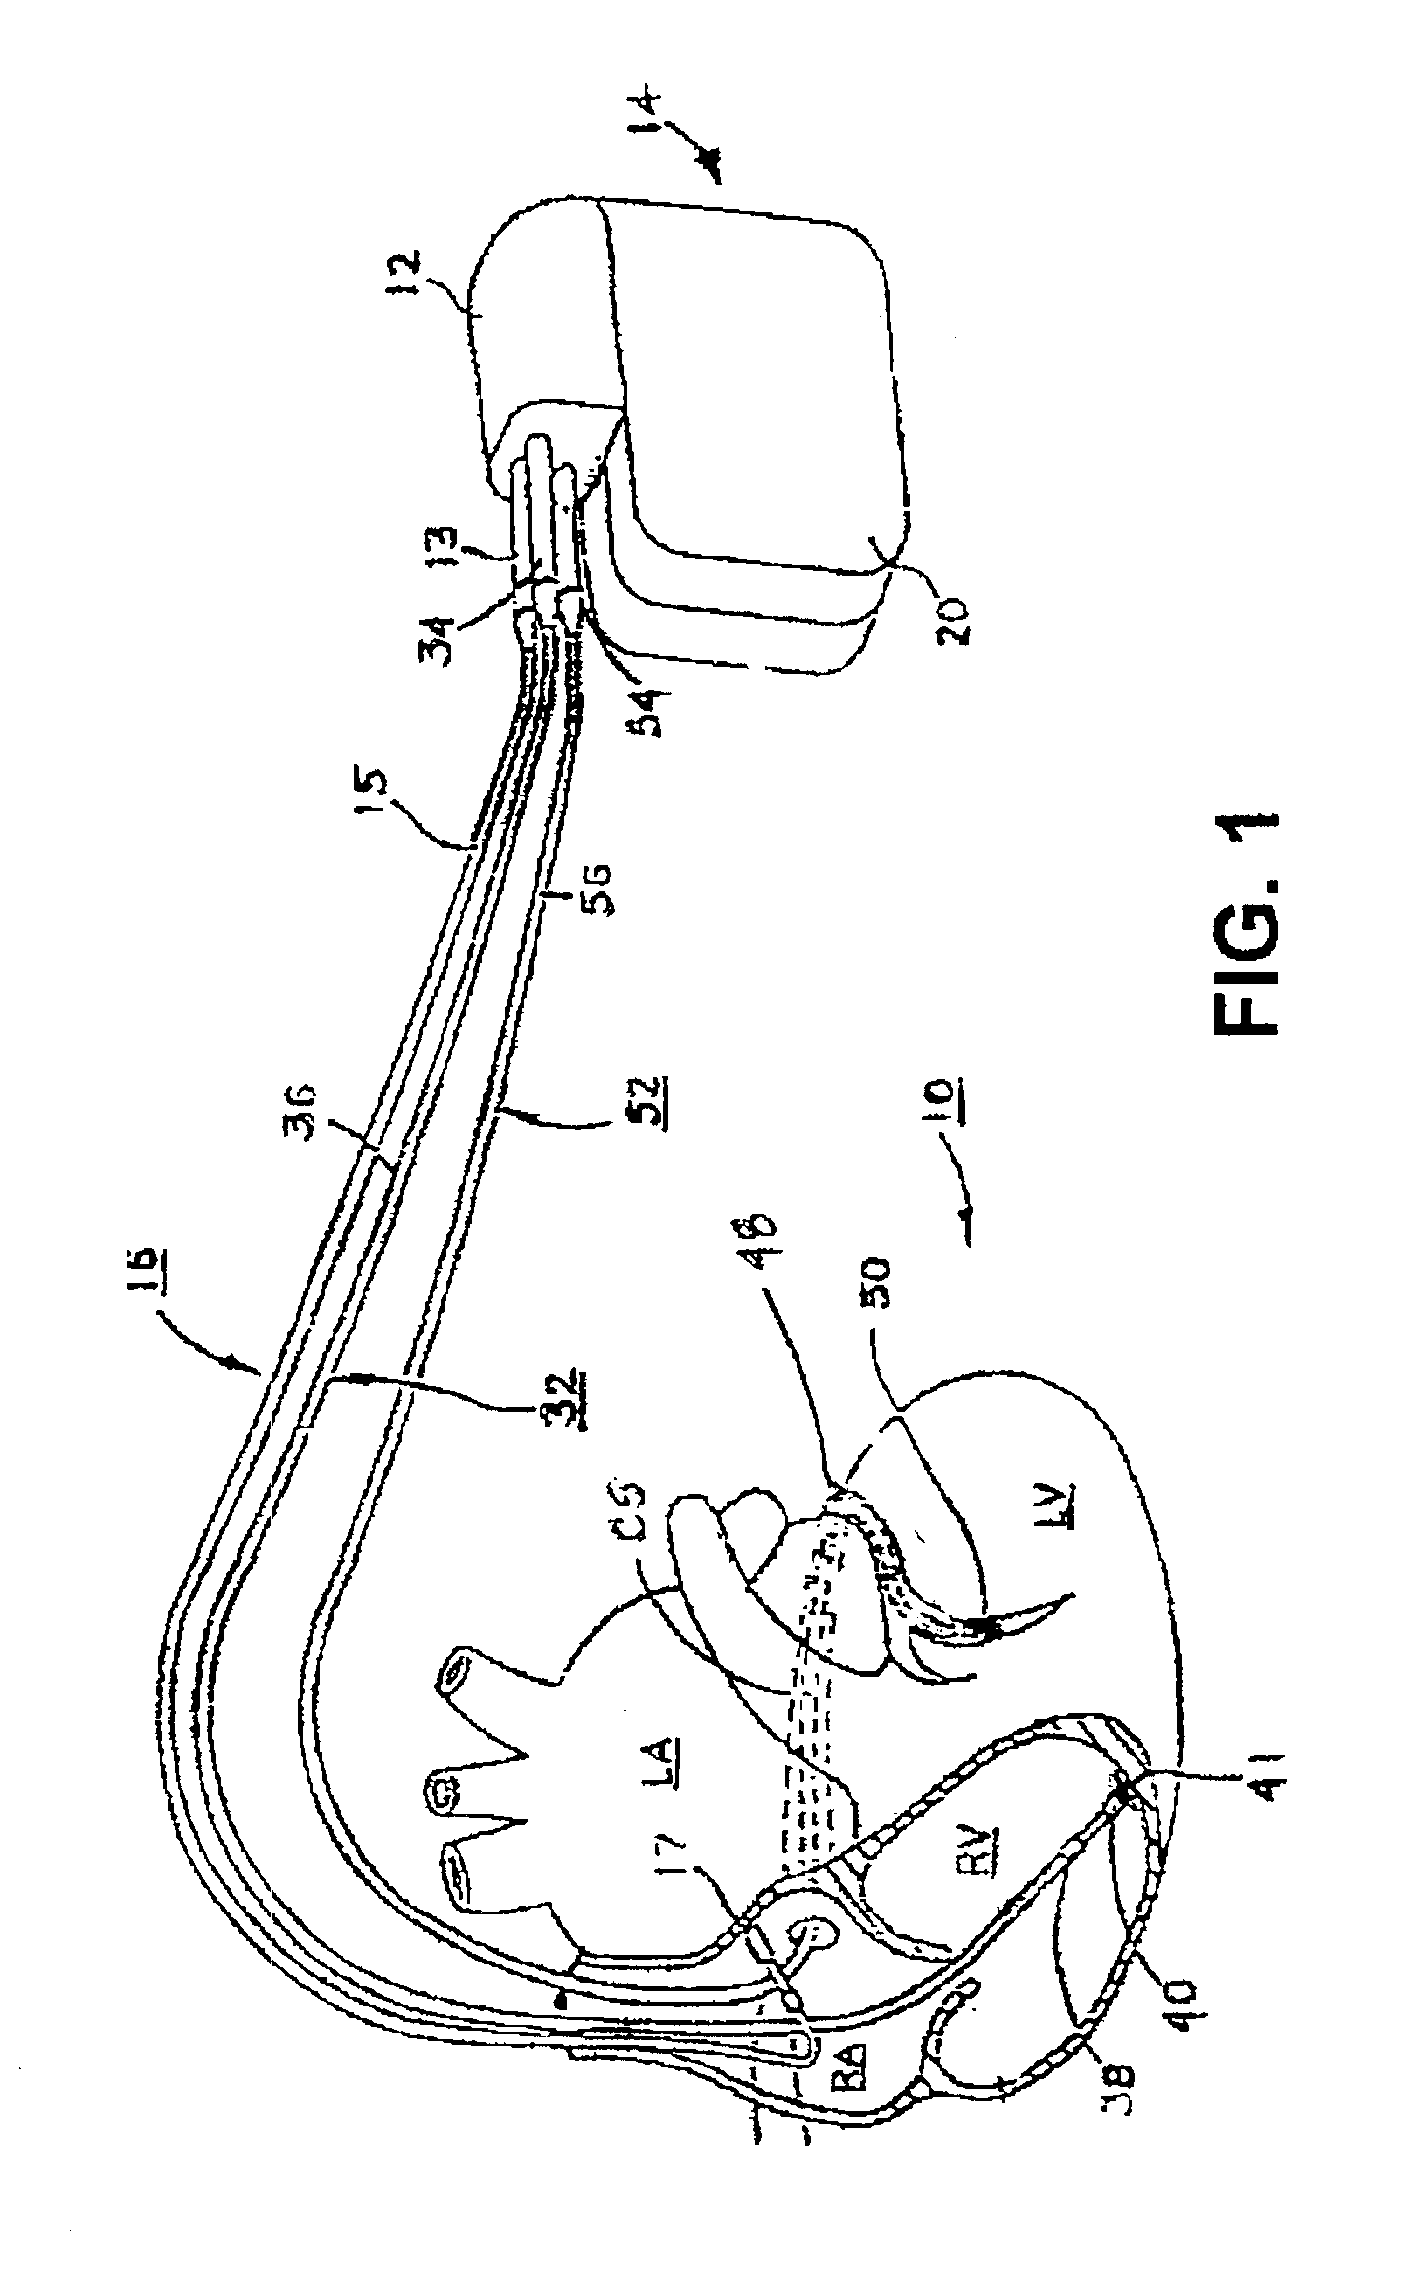 Method and apparatus for optimizing cardiac resynchronization therapy